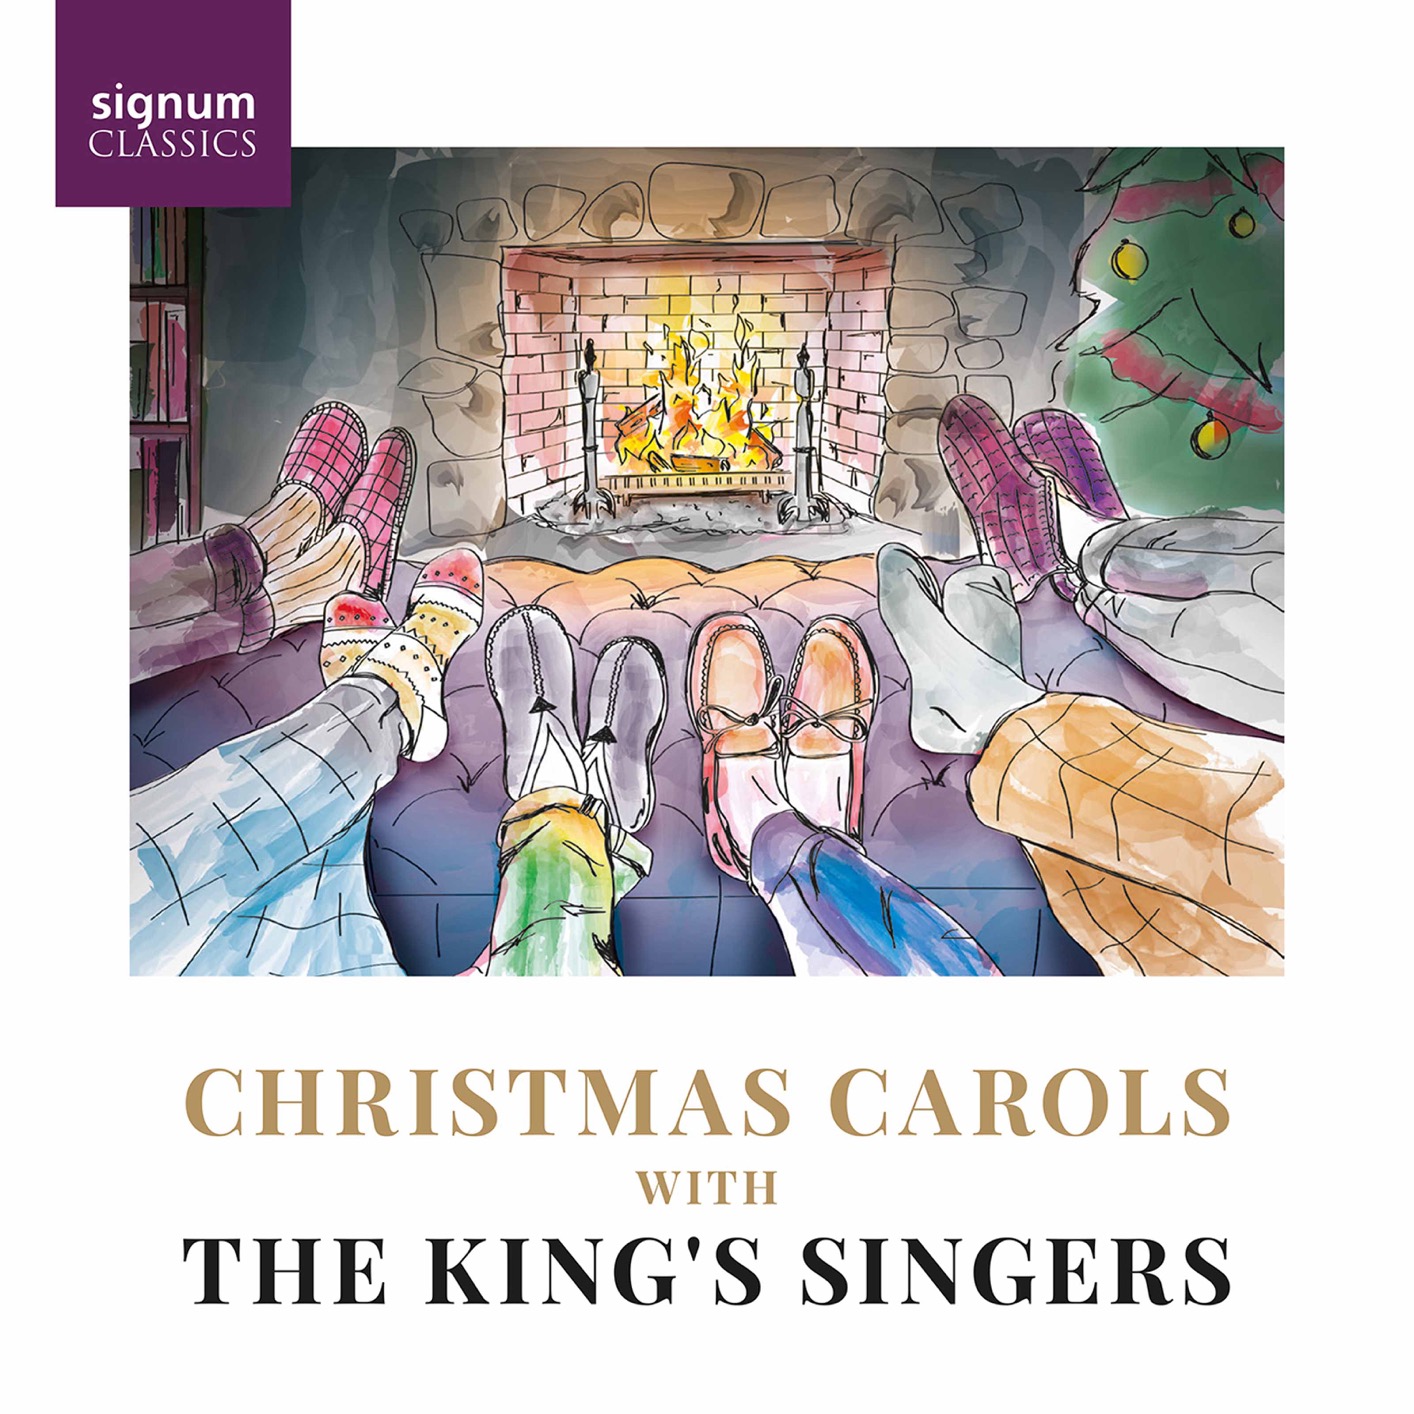 The King’s Singers - Christmas Carols with The King’s Singers (2021) [FLAC 24bit/96kHz]